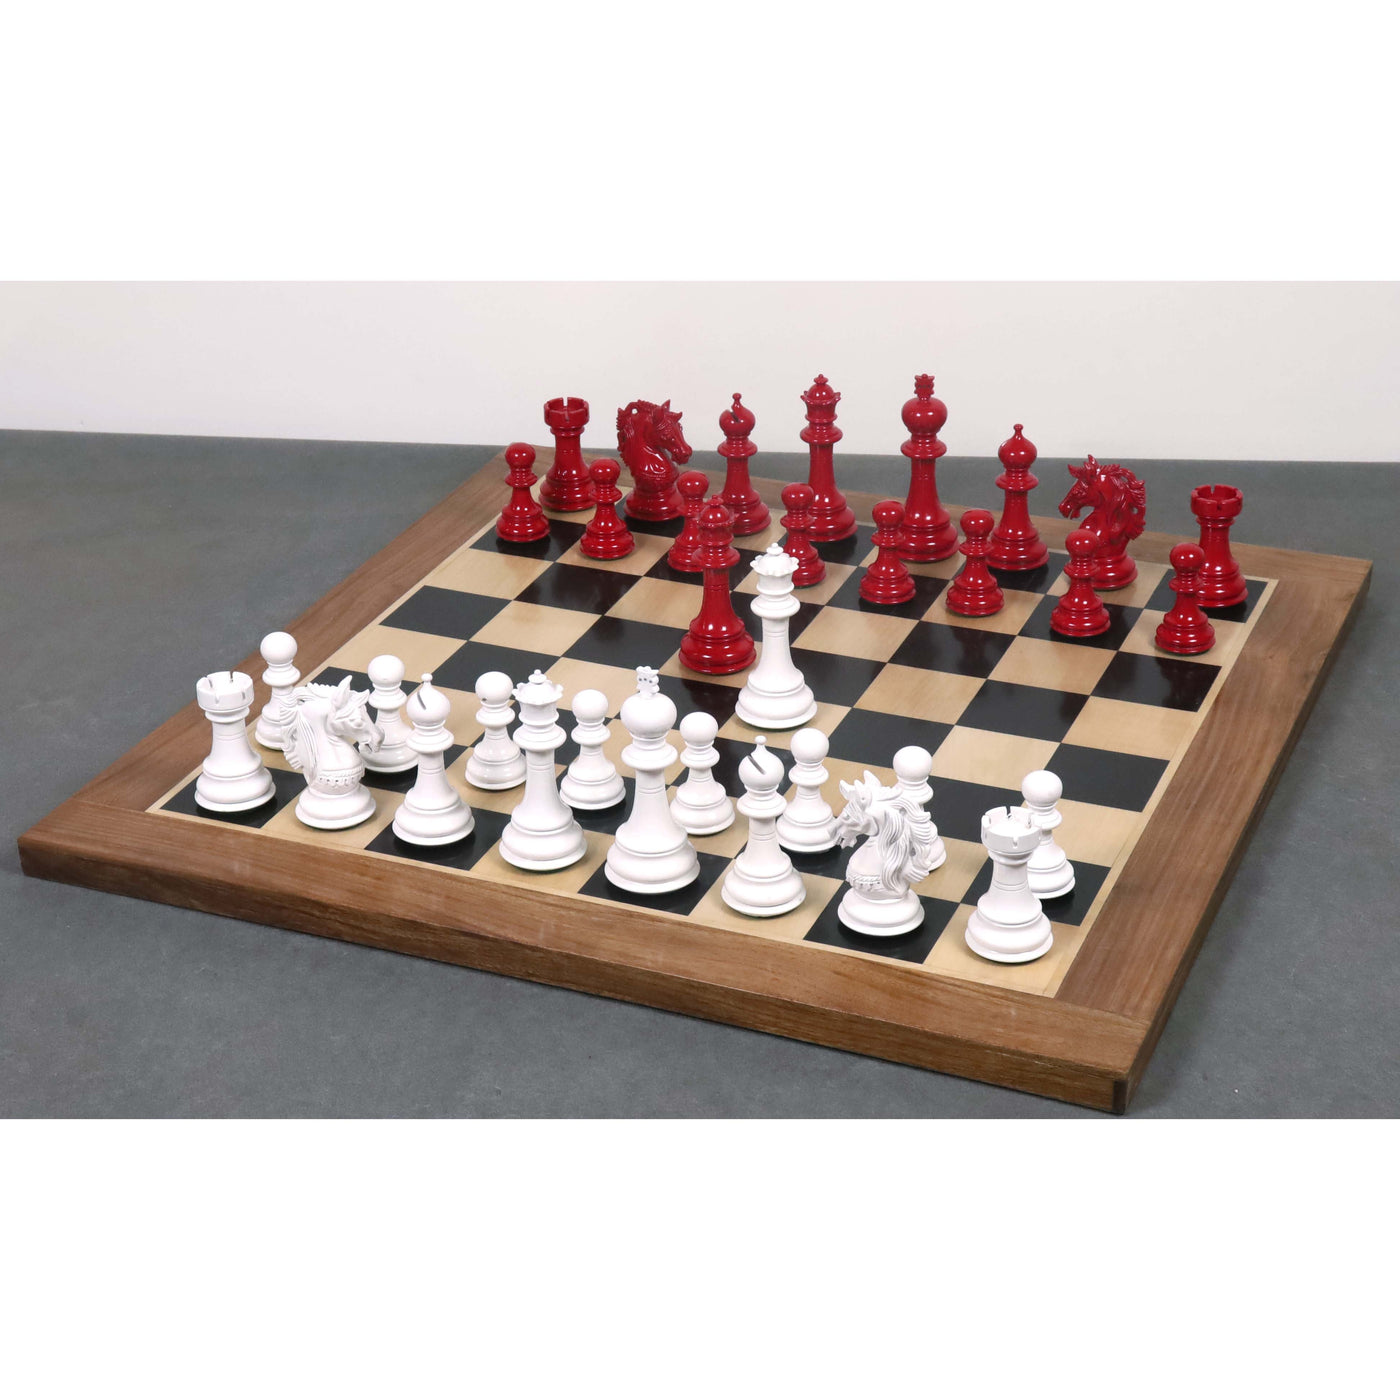 Slightly Imperfect 4.6" Prestige Luxury Staunton Chess Set - Chess Pieces Only- White & Red Lacquer Boxwood